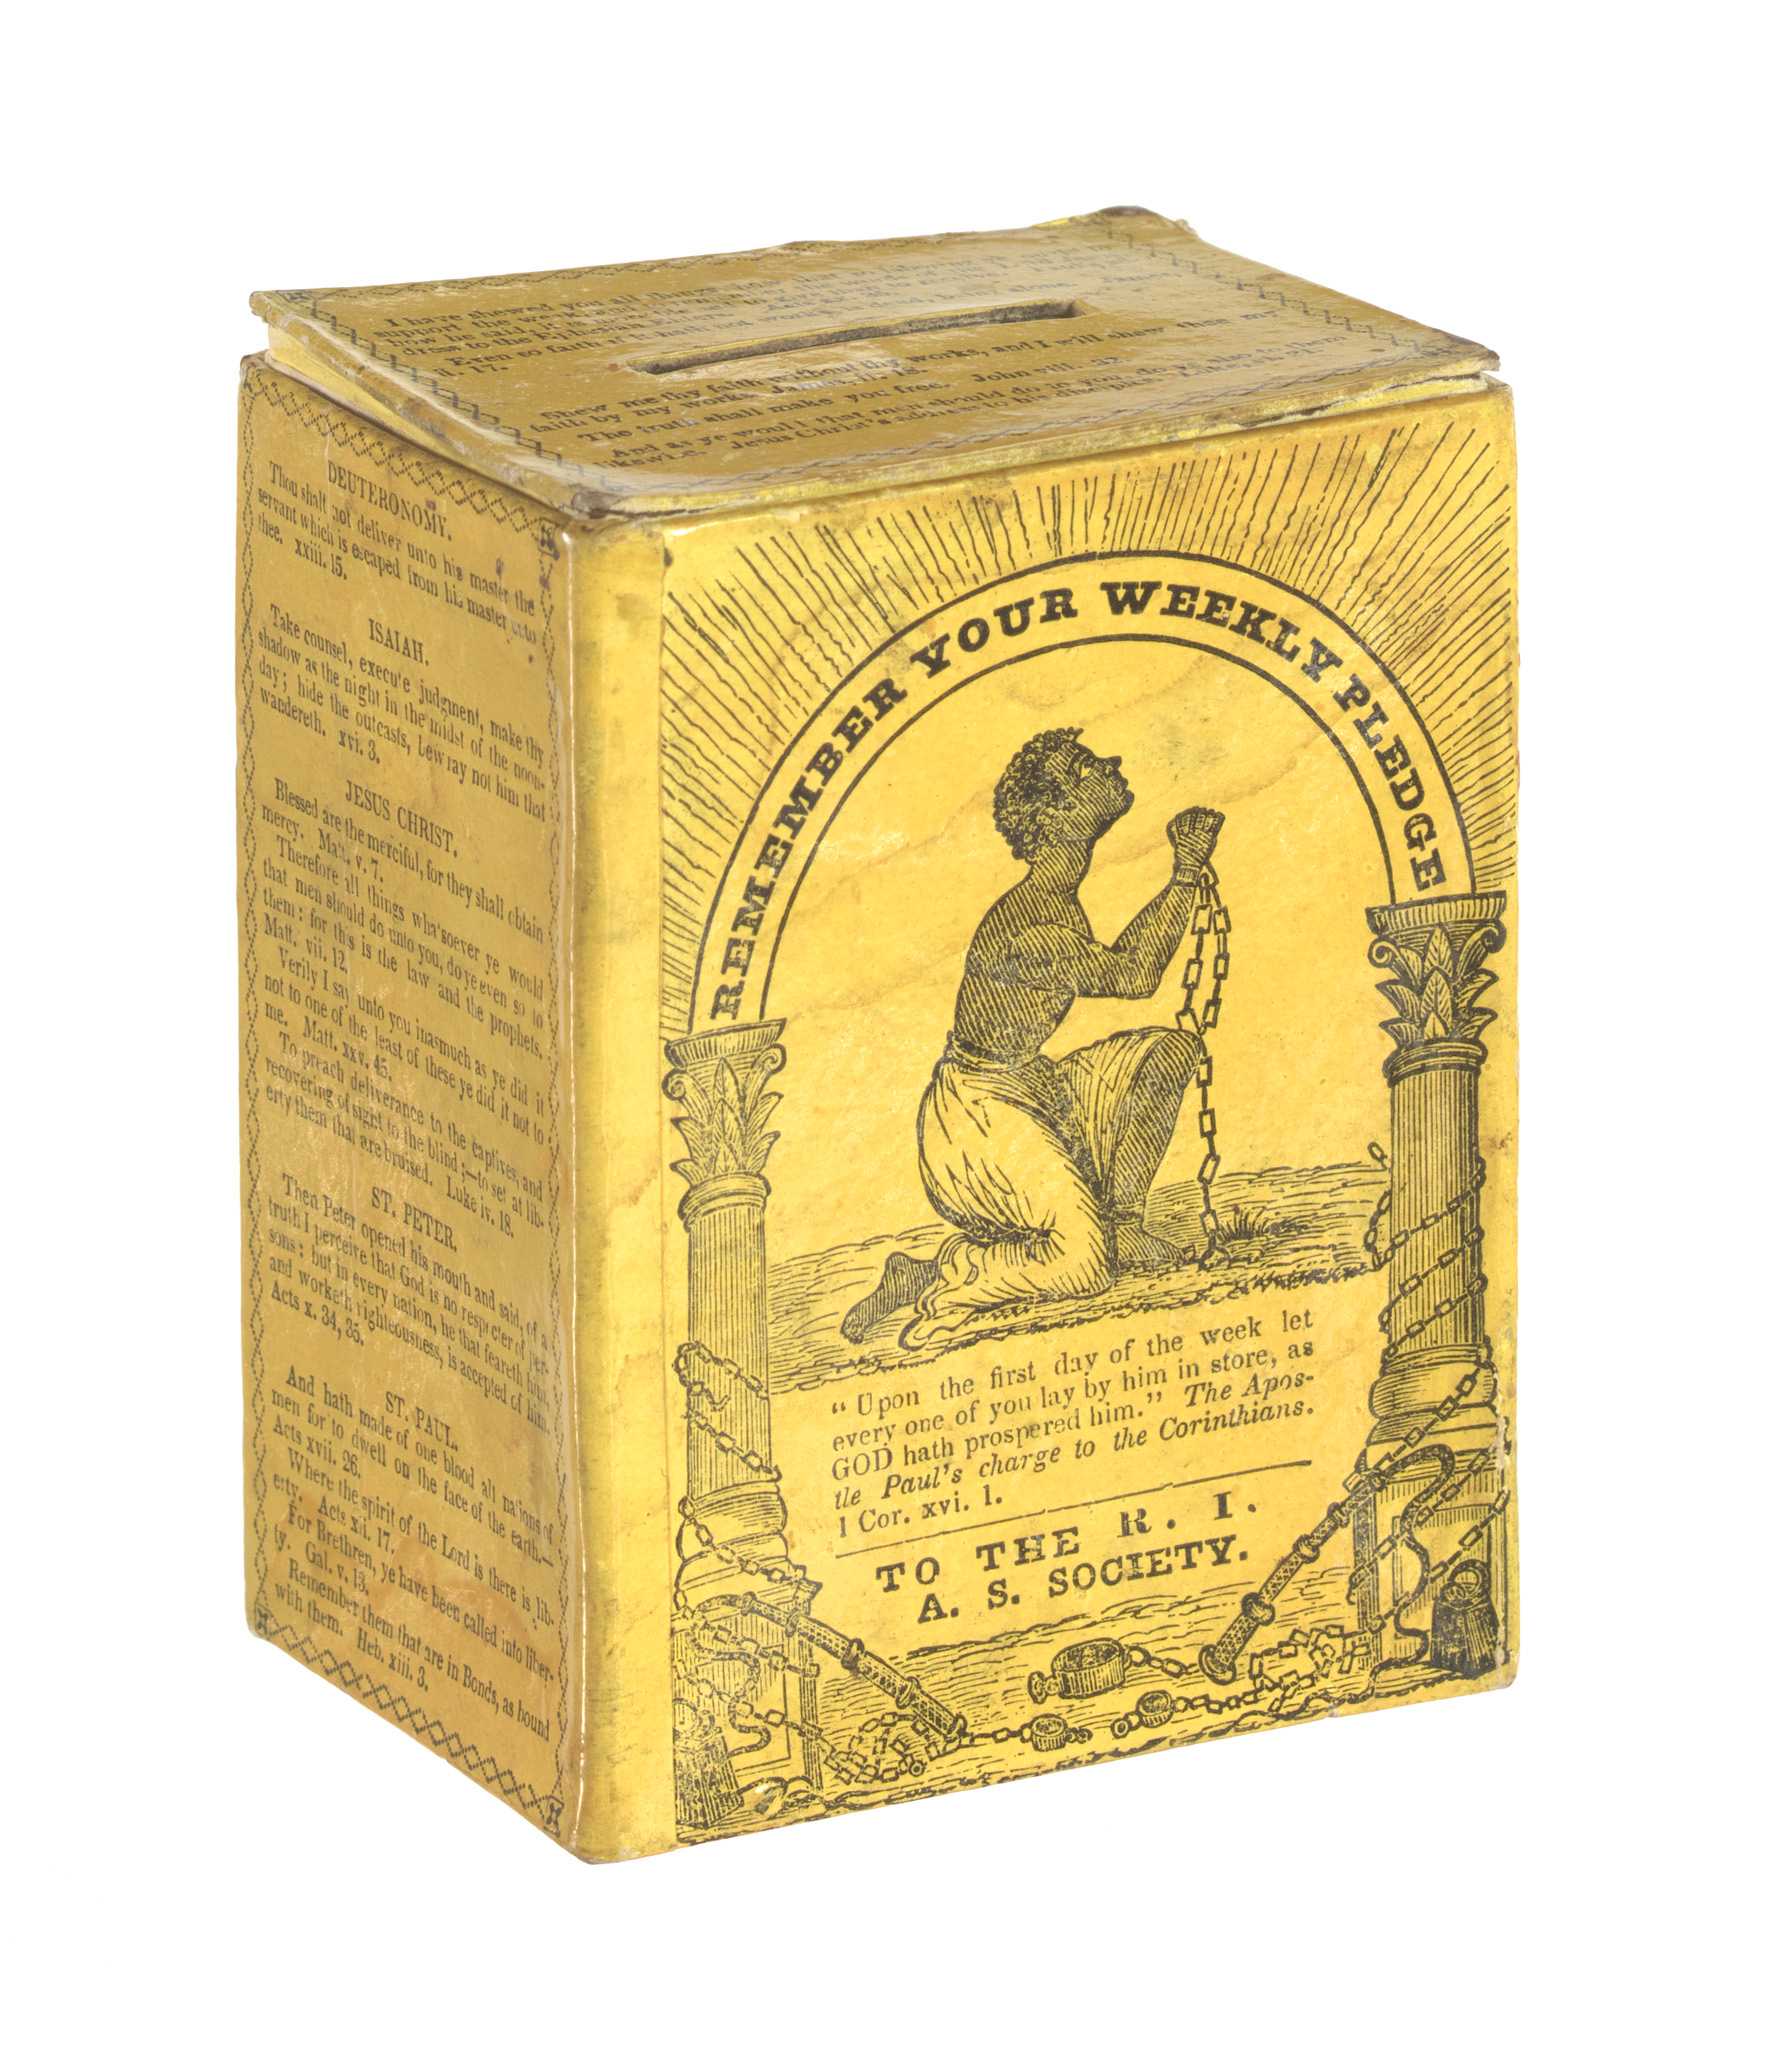 Cardboard coin collection box produced by the Rhode Island Anti-Slavery Society. The box is constructed in two pieces, a top and bottom. The top has a slot for coins and fits into the bottom. The box is yellow with black print, including a tableau on the front of kneeling enslaved figure surrounded by implements of bondage.